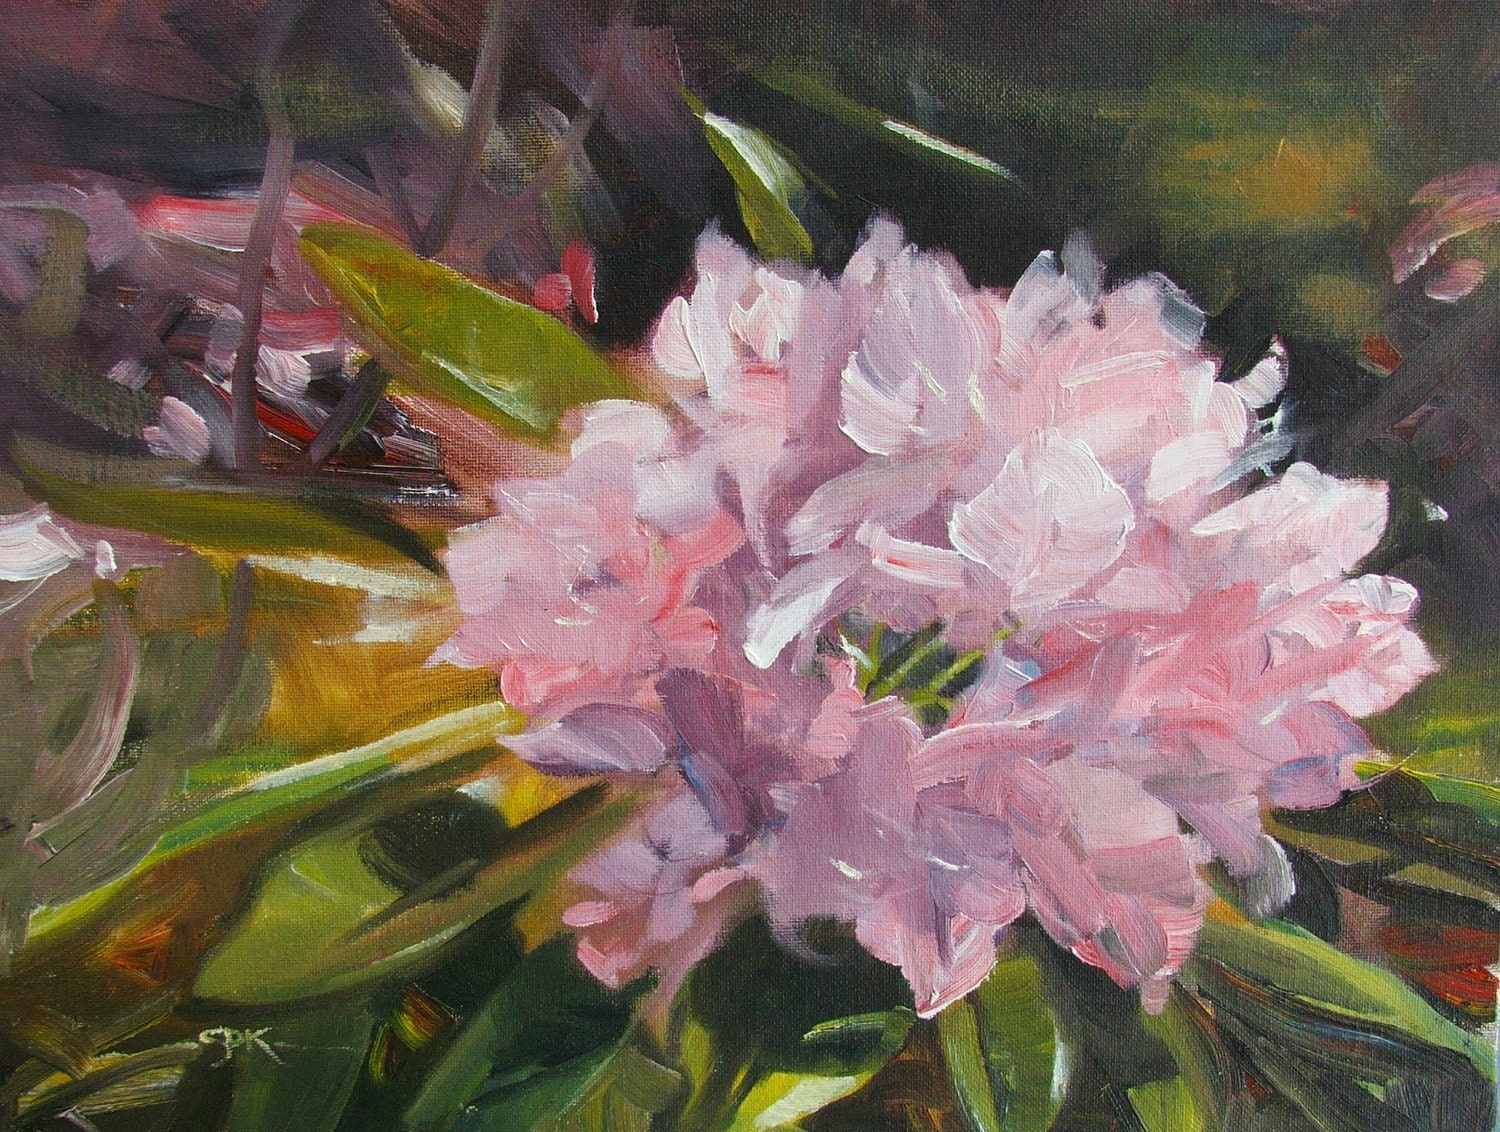 Original Oil Painting -  Susan Kennedy - Rhododendron in Sun - "Deep in its Roots"